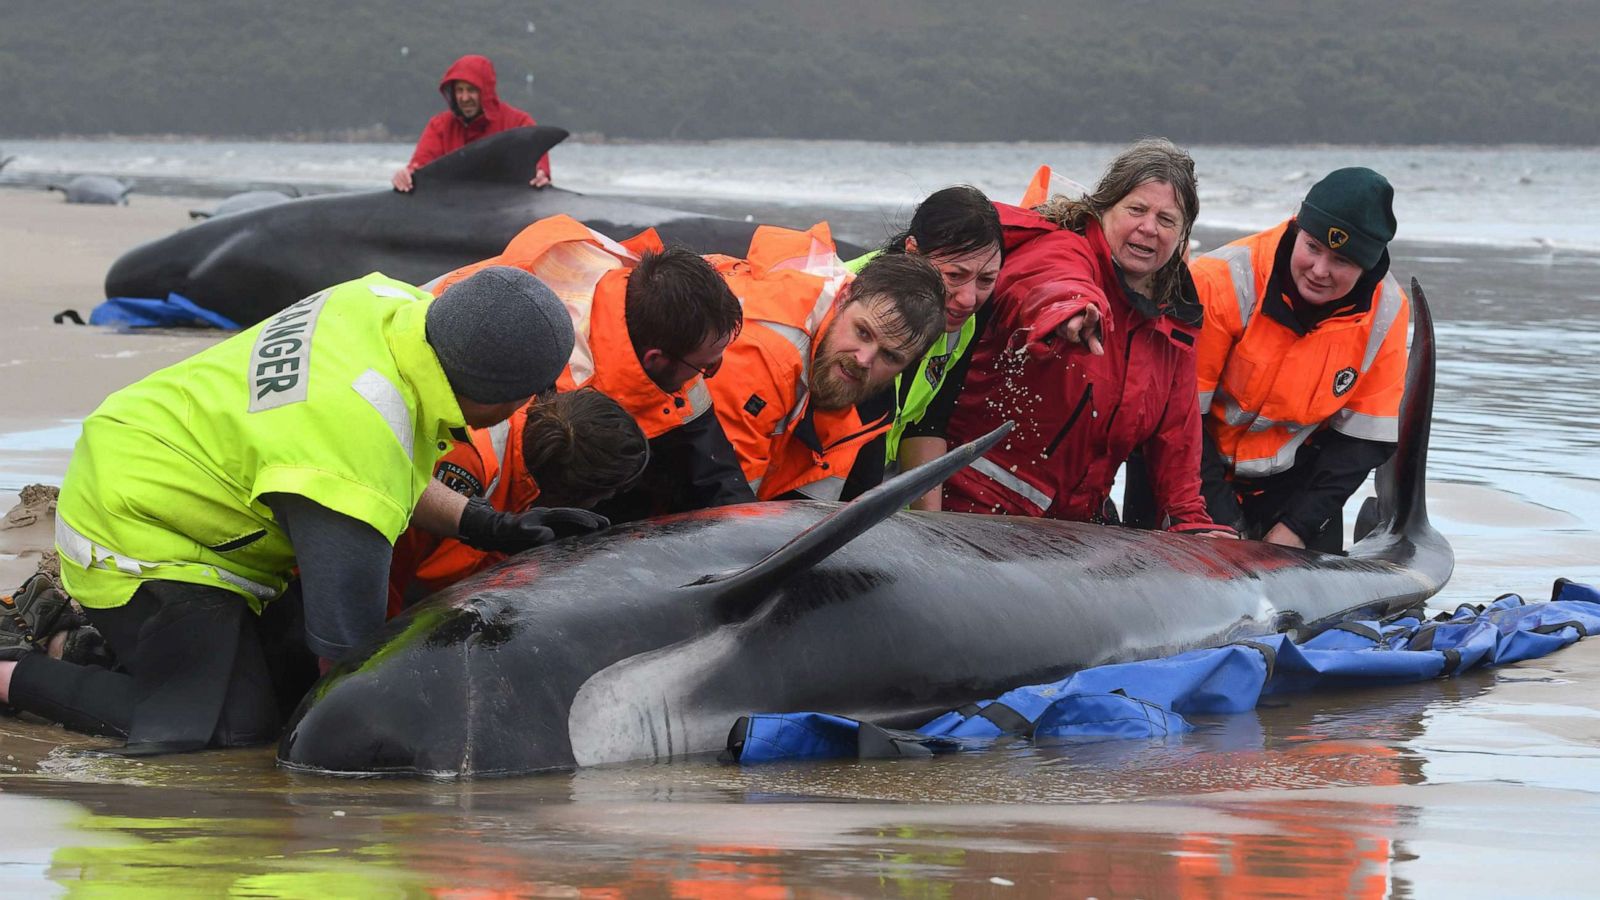 Apocalyptic image': More than 330 whales found dead in largest known whale  stranding event